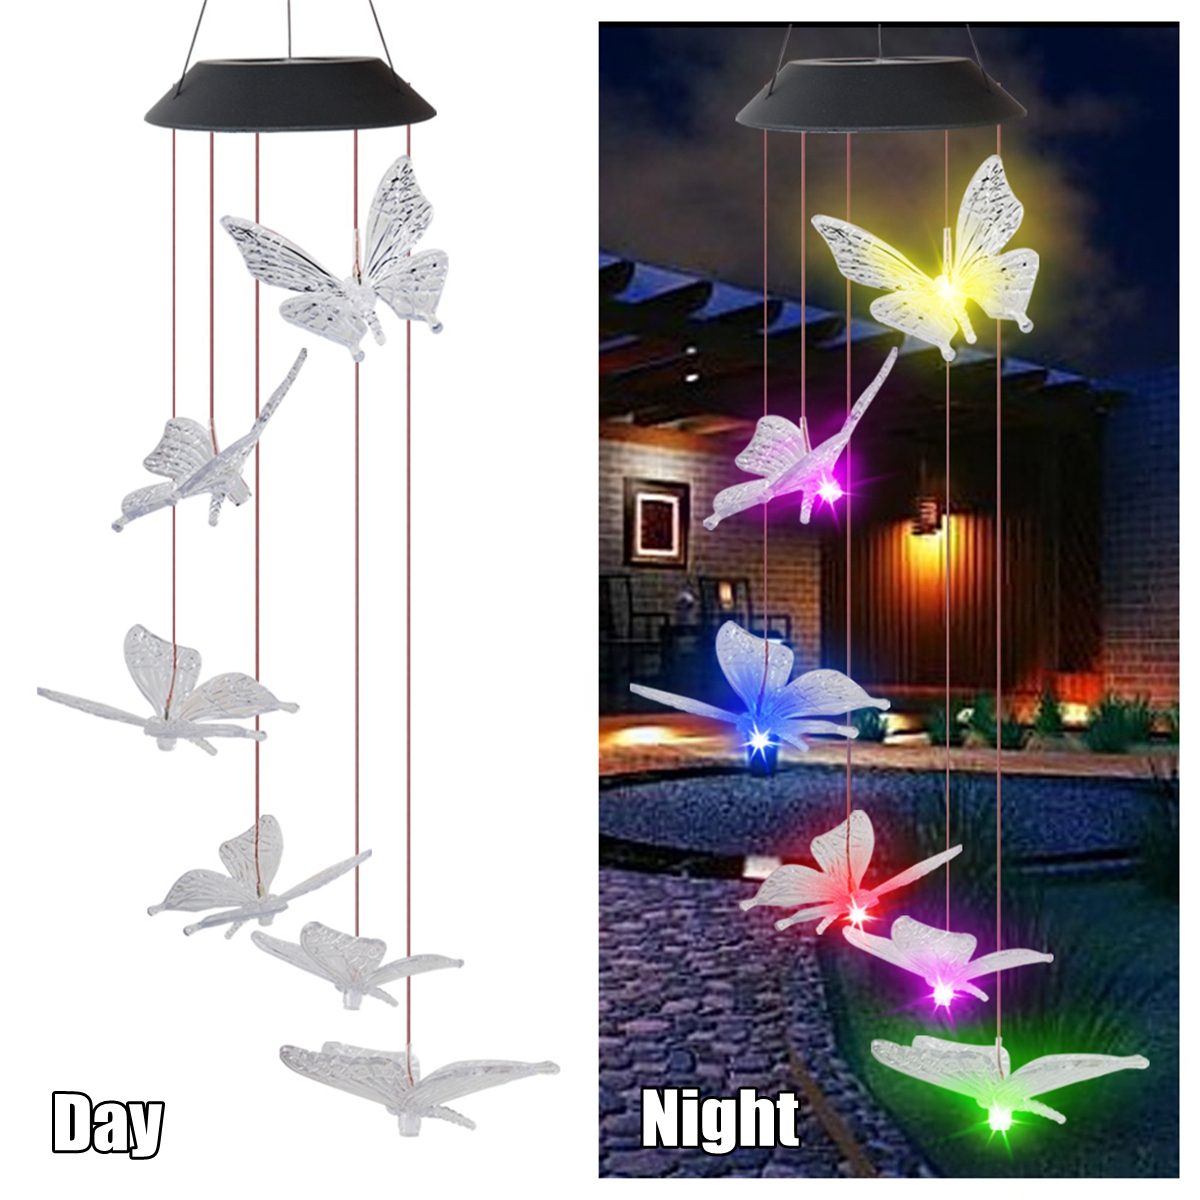 Solar Color Changing Powered Wind Chime LED Light Garden Hanging Spinner Lamp